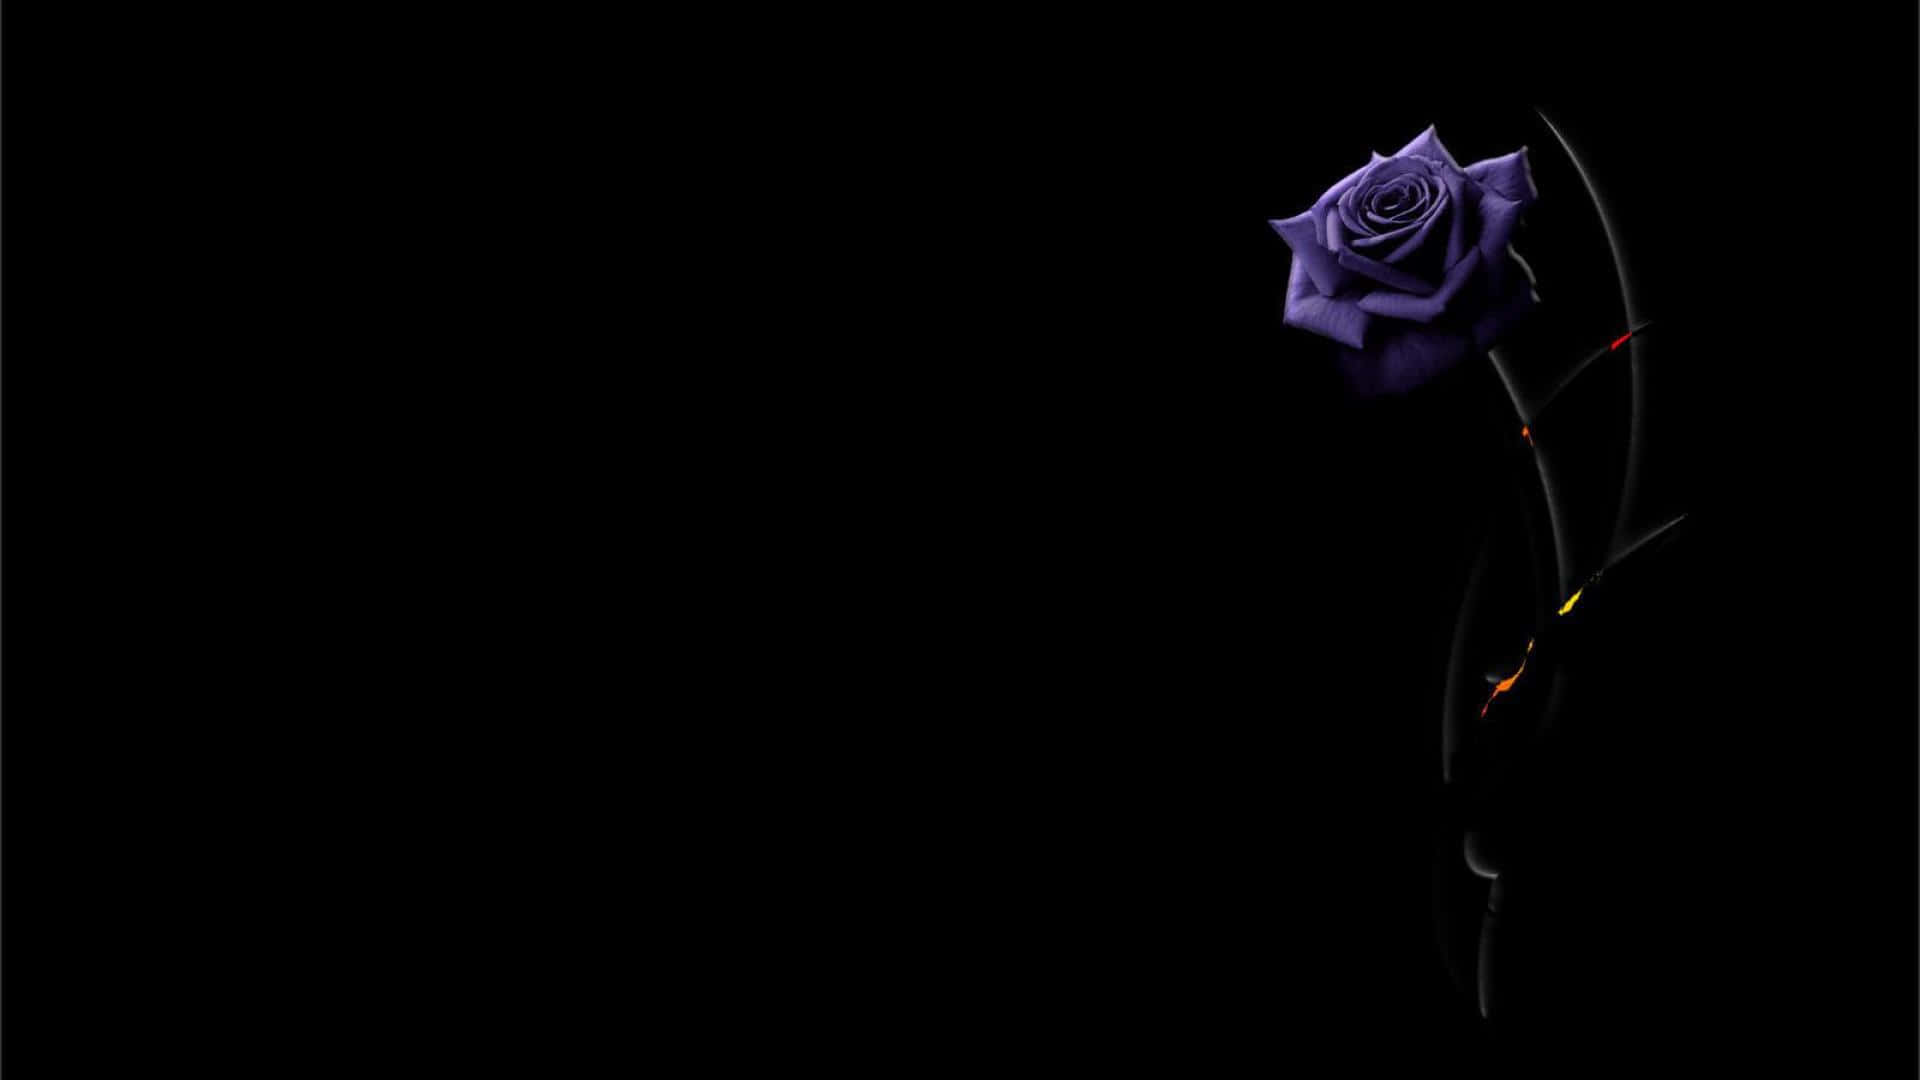 A Purple Rose Is Shown Against A Black Background Wallpaper